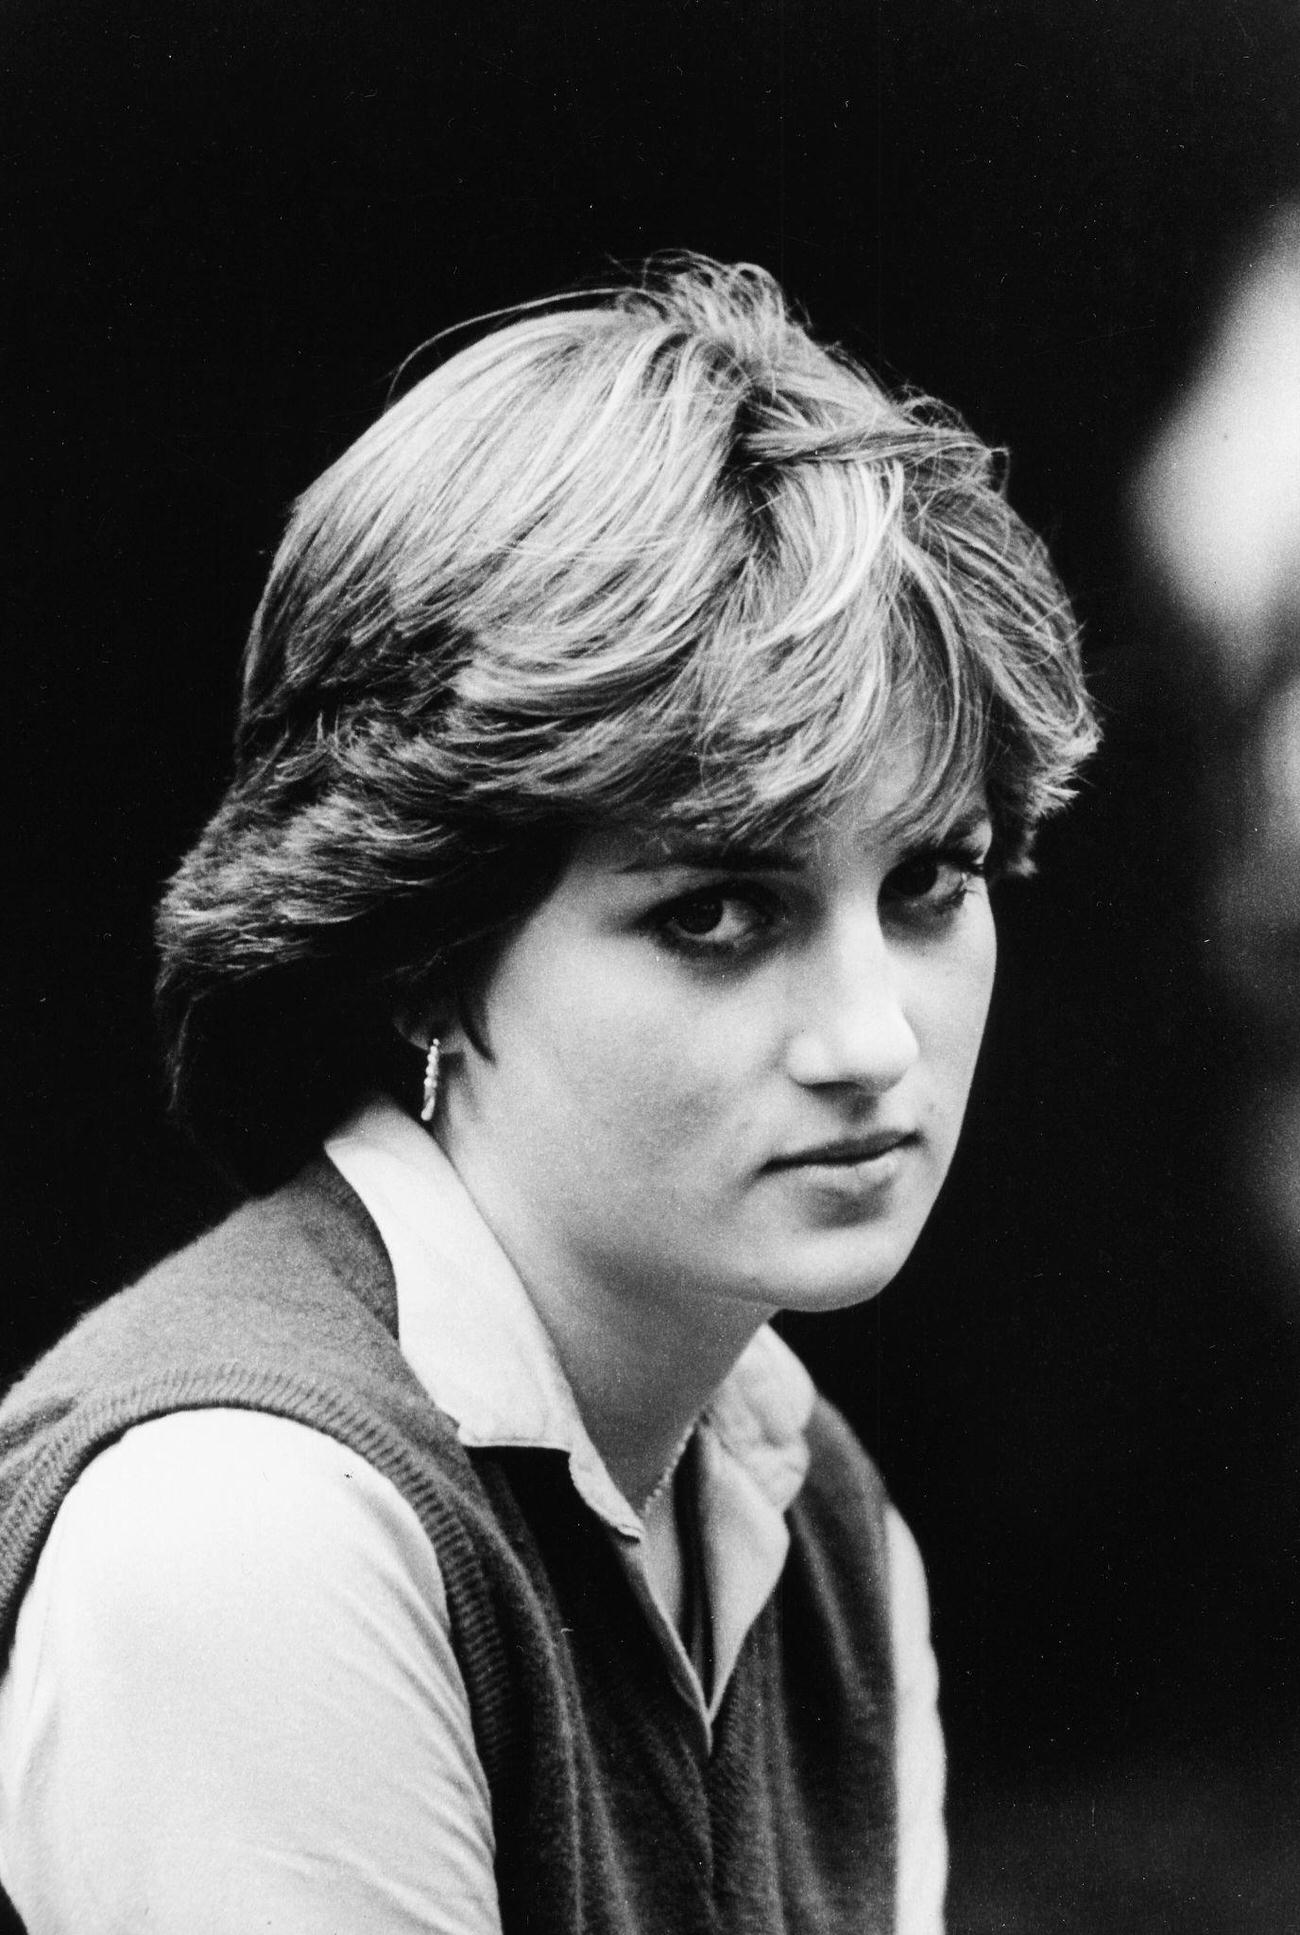 Lady Diana Spencer, fiance of Prince Charles, in London, February 24th 1981.